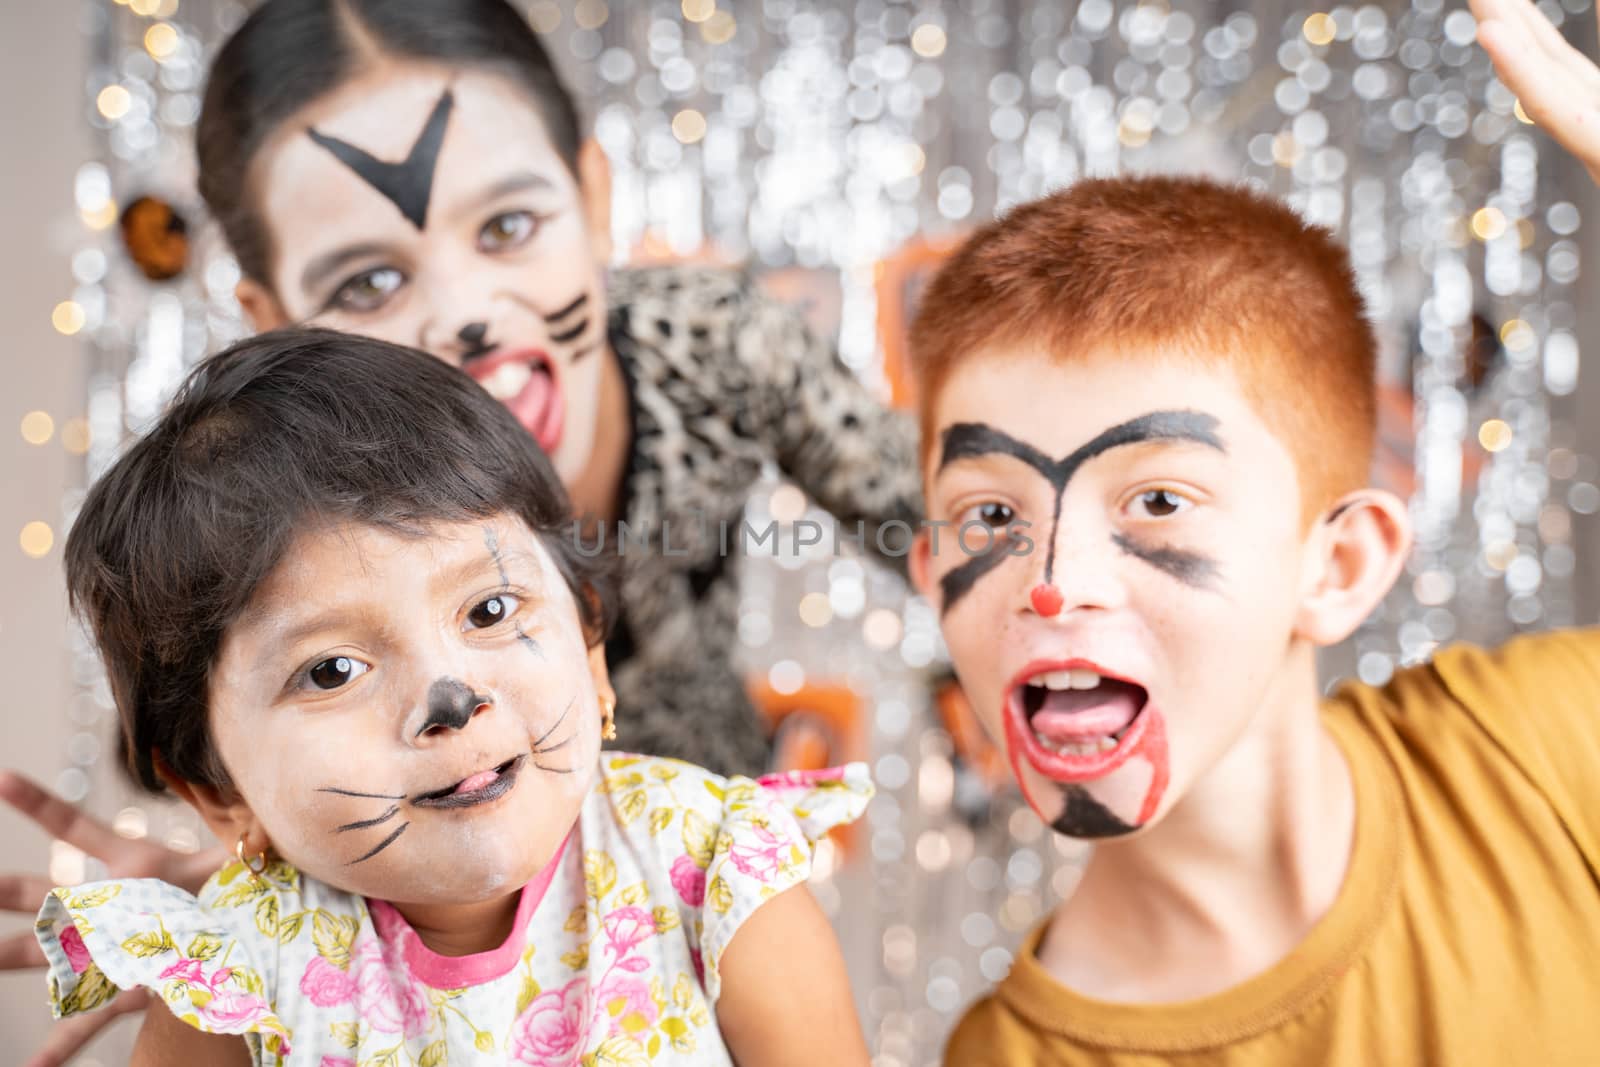 Group of kids in Halloween costumes gesticulating and making scary or spooky faces on decorated background by looking into camera. by lakshmiprasad.maski@gmai.com